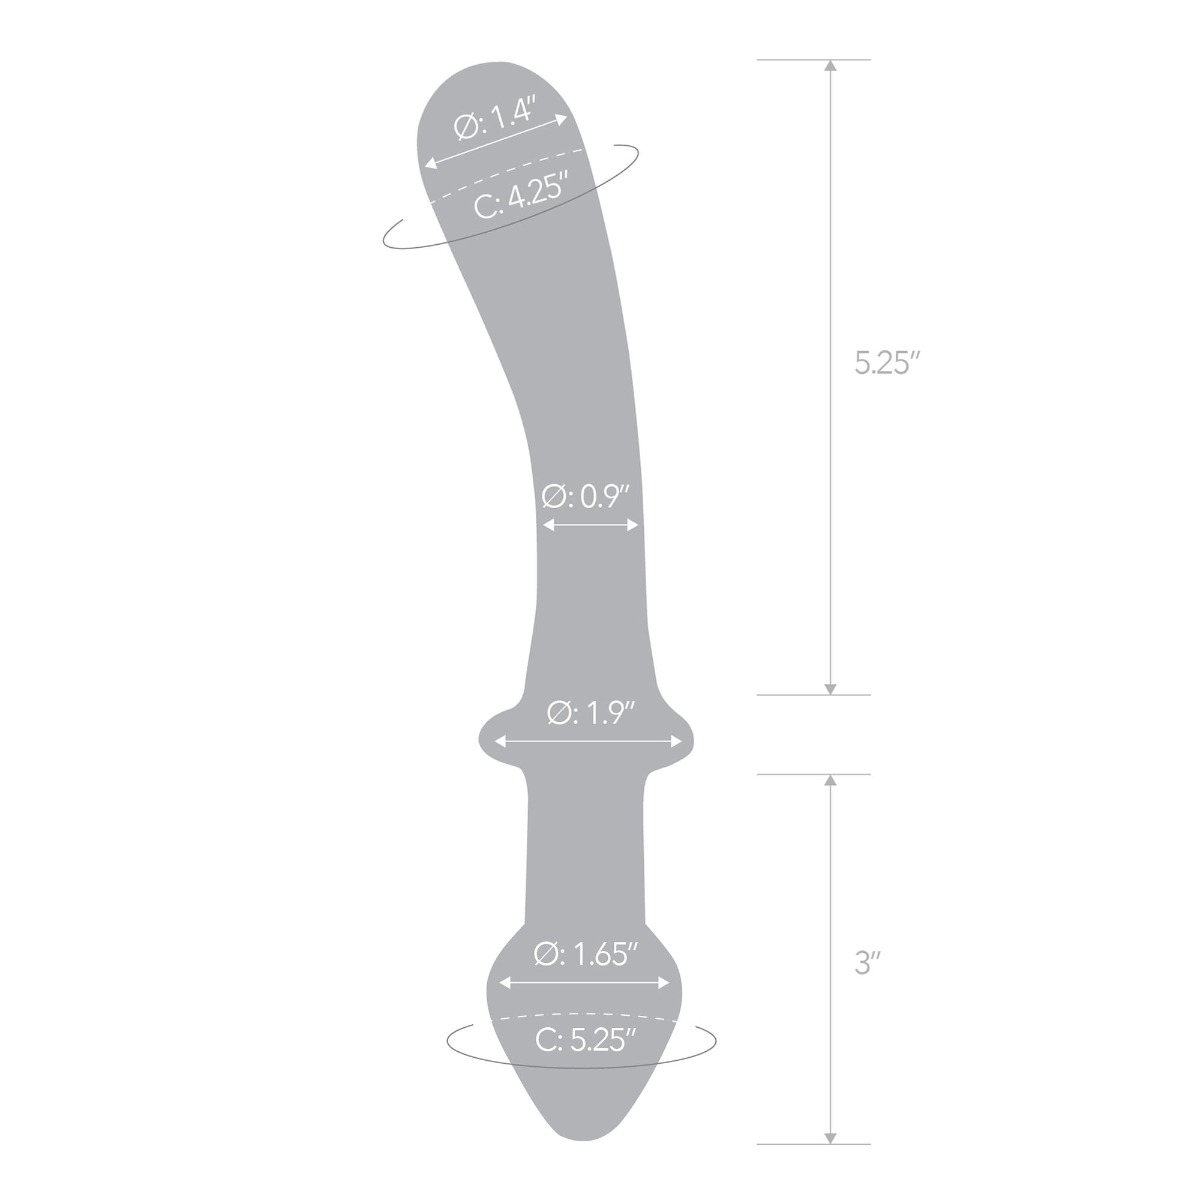 9” classic curved dual-ended dildo